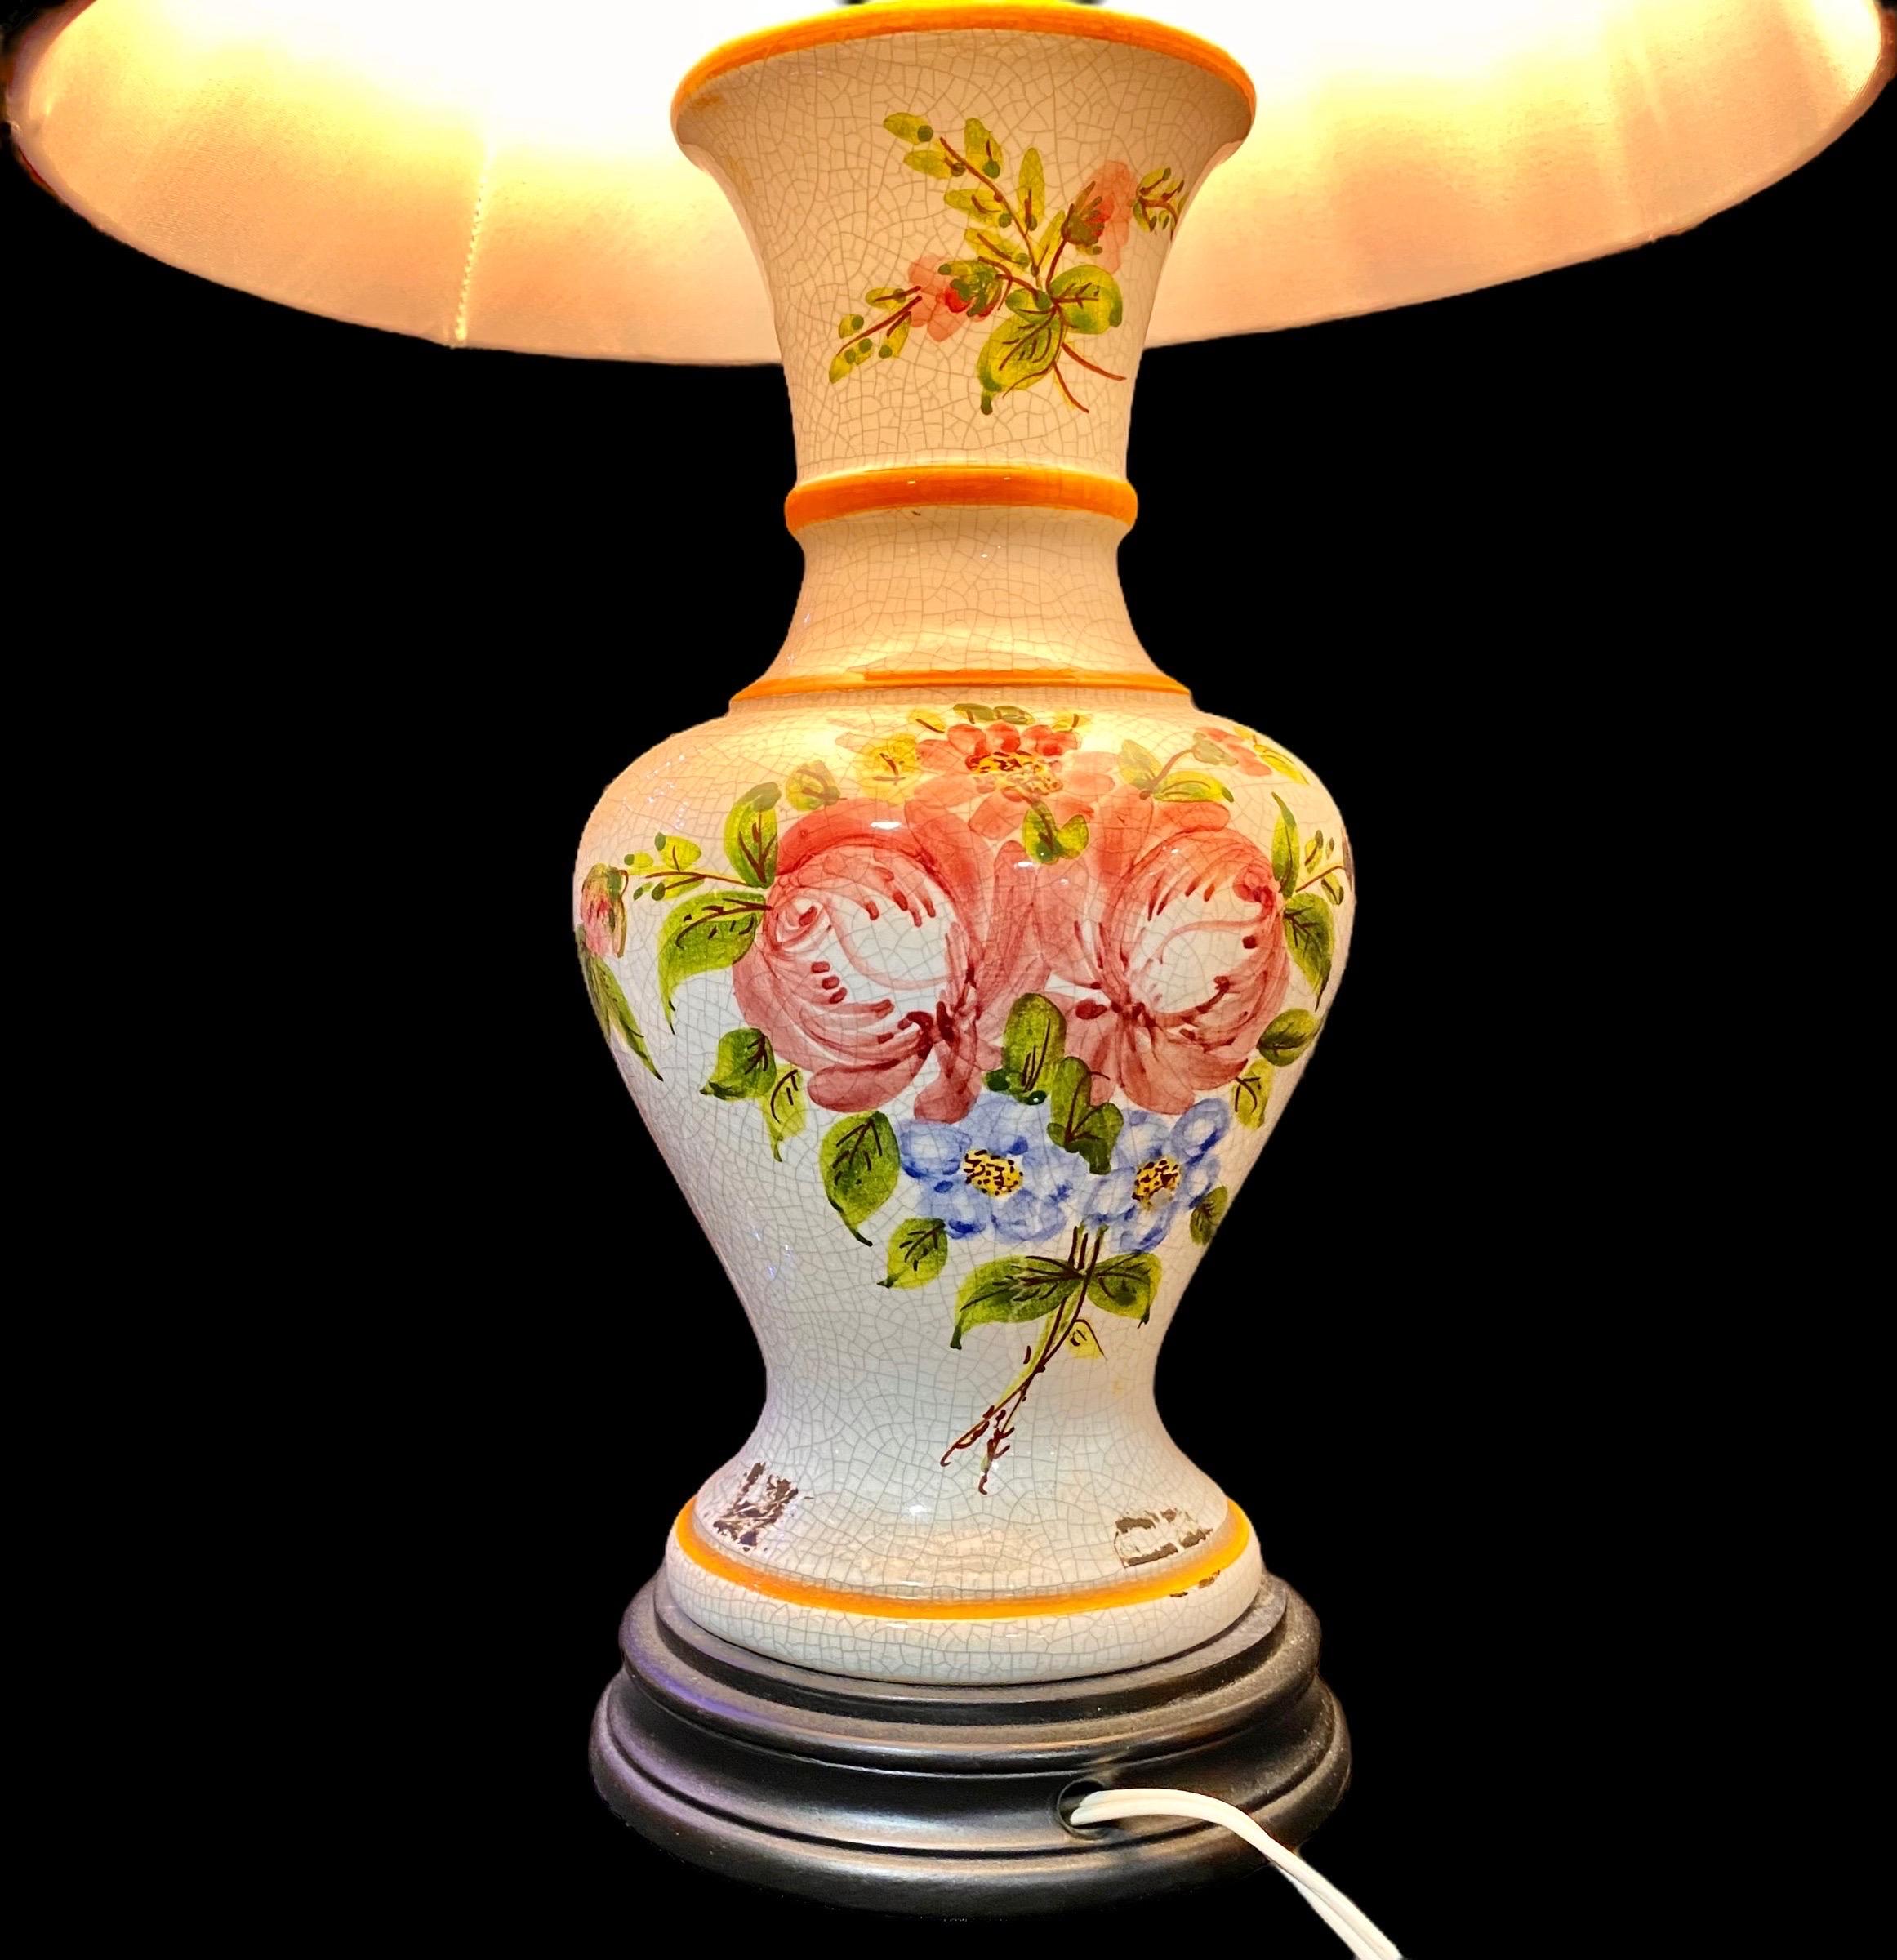 A vintage French faience vase turned table lamp with a lovely hand painted provincial floral design, wooden base and red silk shade. 